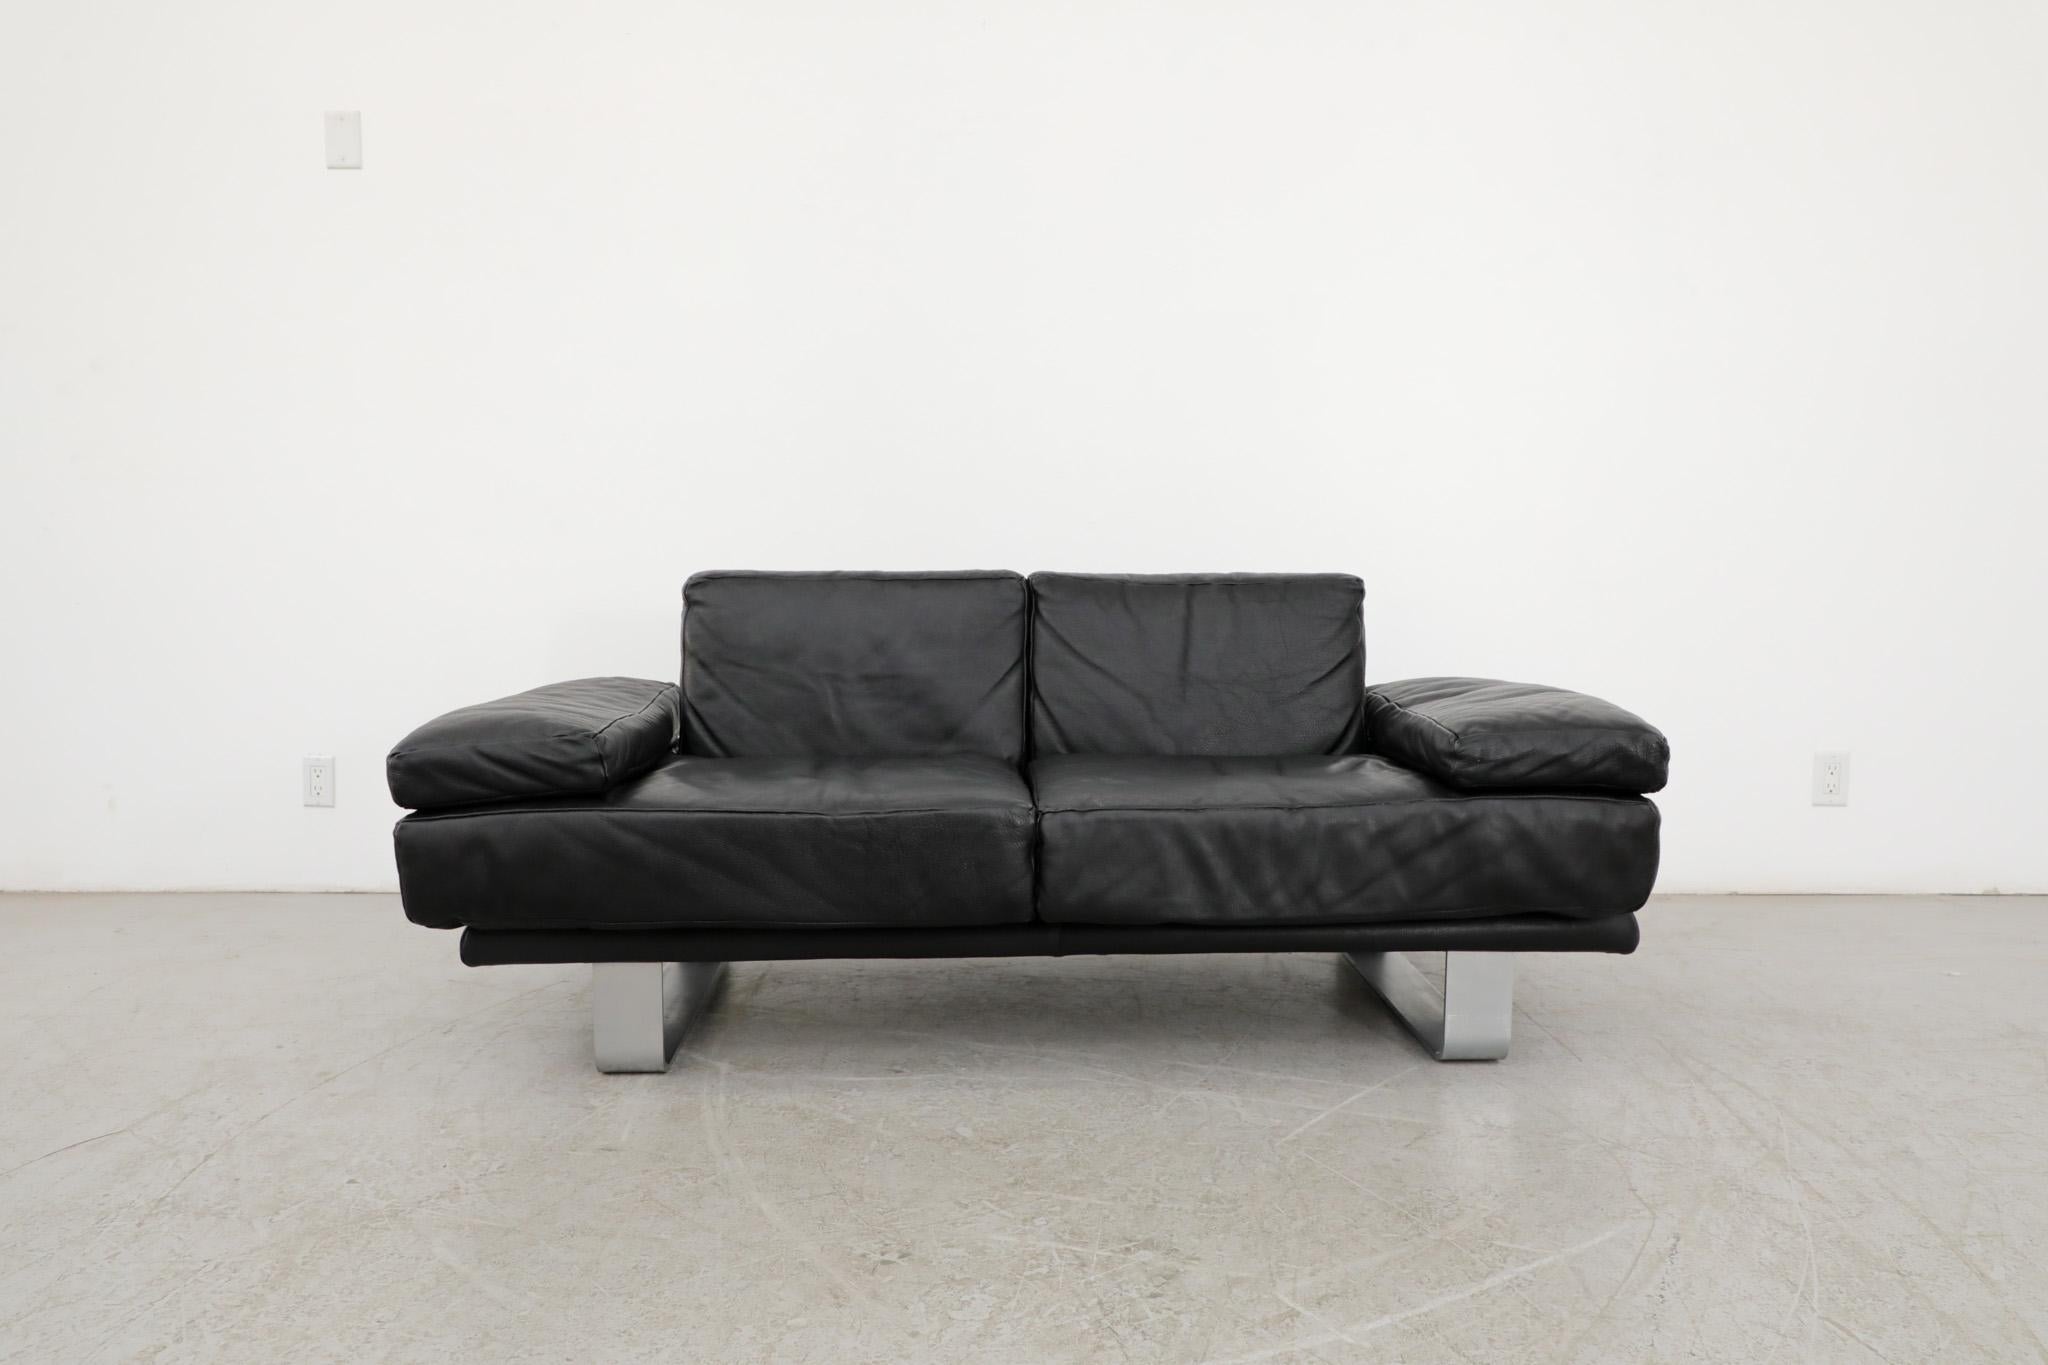 Amazing Rolf Benz '6600' black leather loveseat. A versatile minimalist sofa with a timeless design and cozy seat. In impressive original condition with some wear that is consistent with it's age and use.